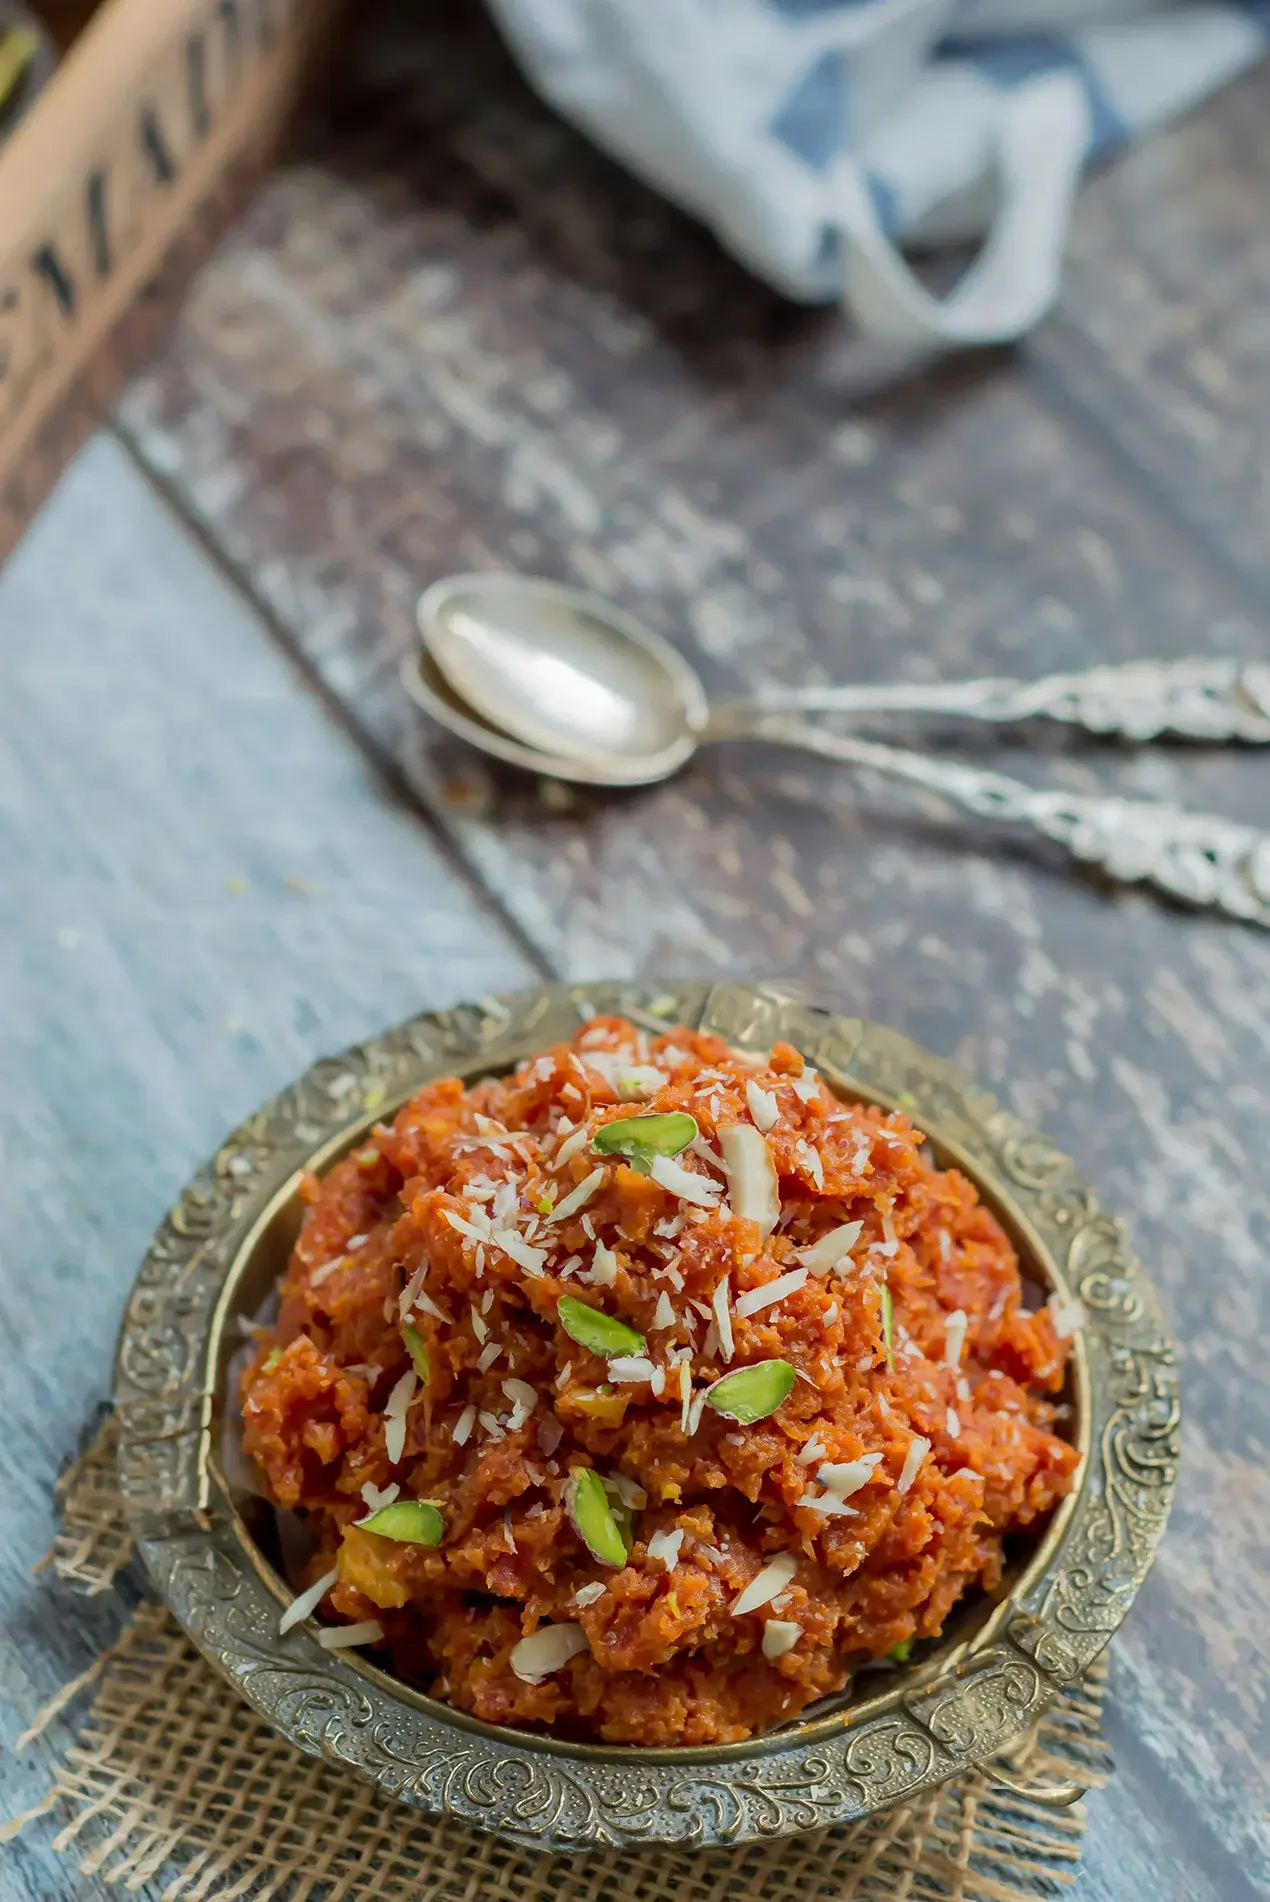 Among the simplest Indian Sweets Recipes, Here’s Everything You Need To Know To Make Gajar Ka Halwa 3 Different Ways